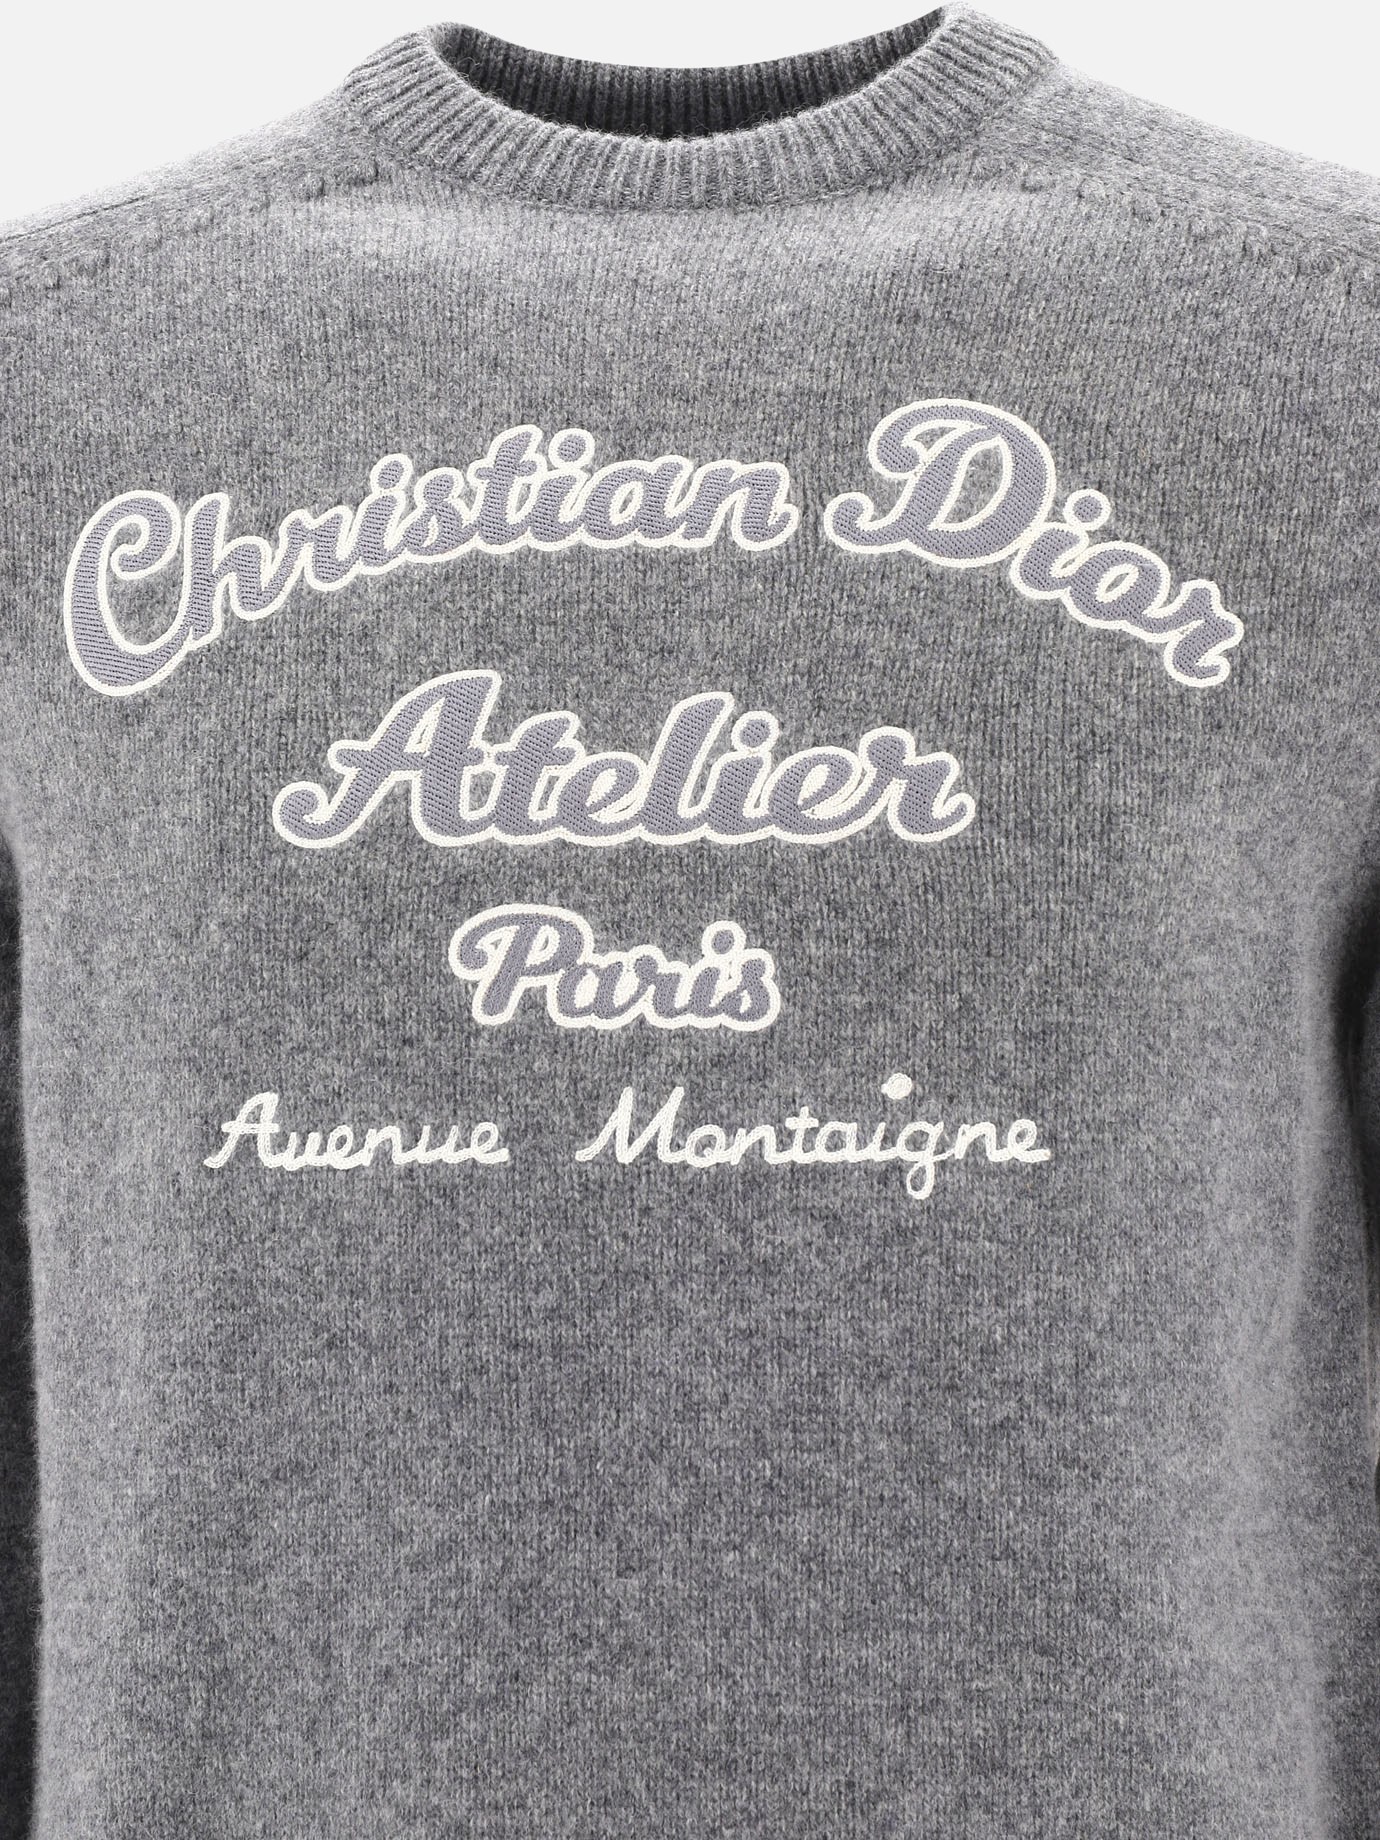  Christian Dior Atelier  sweater by Dior